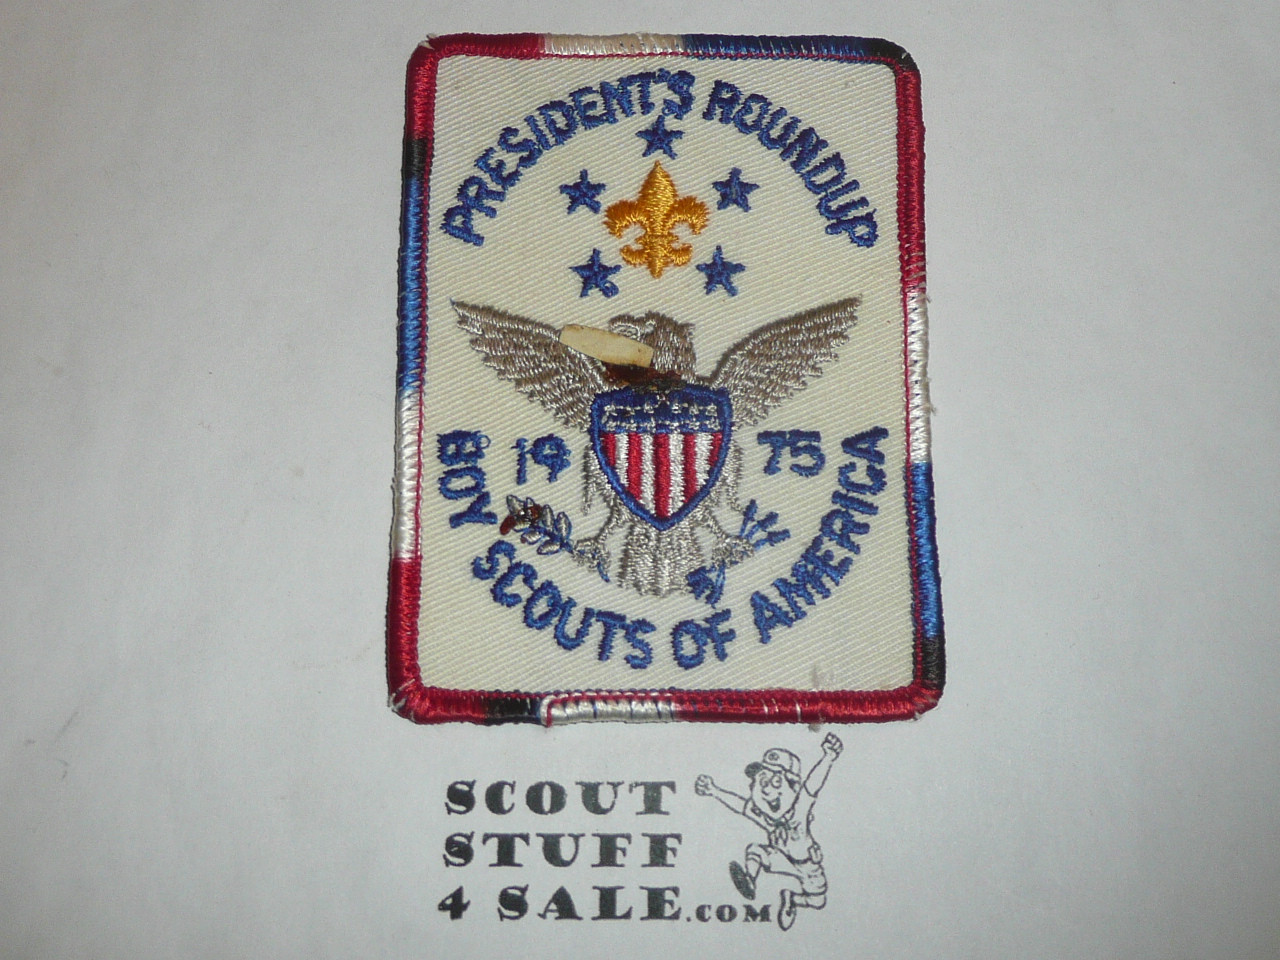 1975 President's Roundup Patch, Generic BSA issue